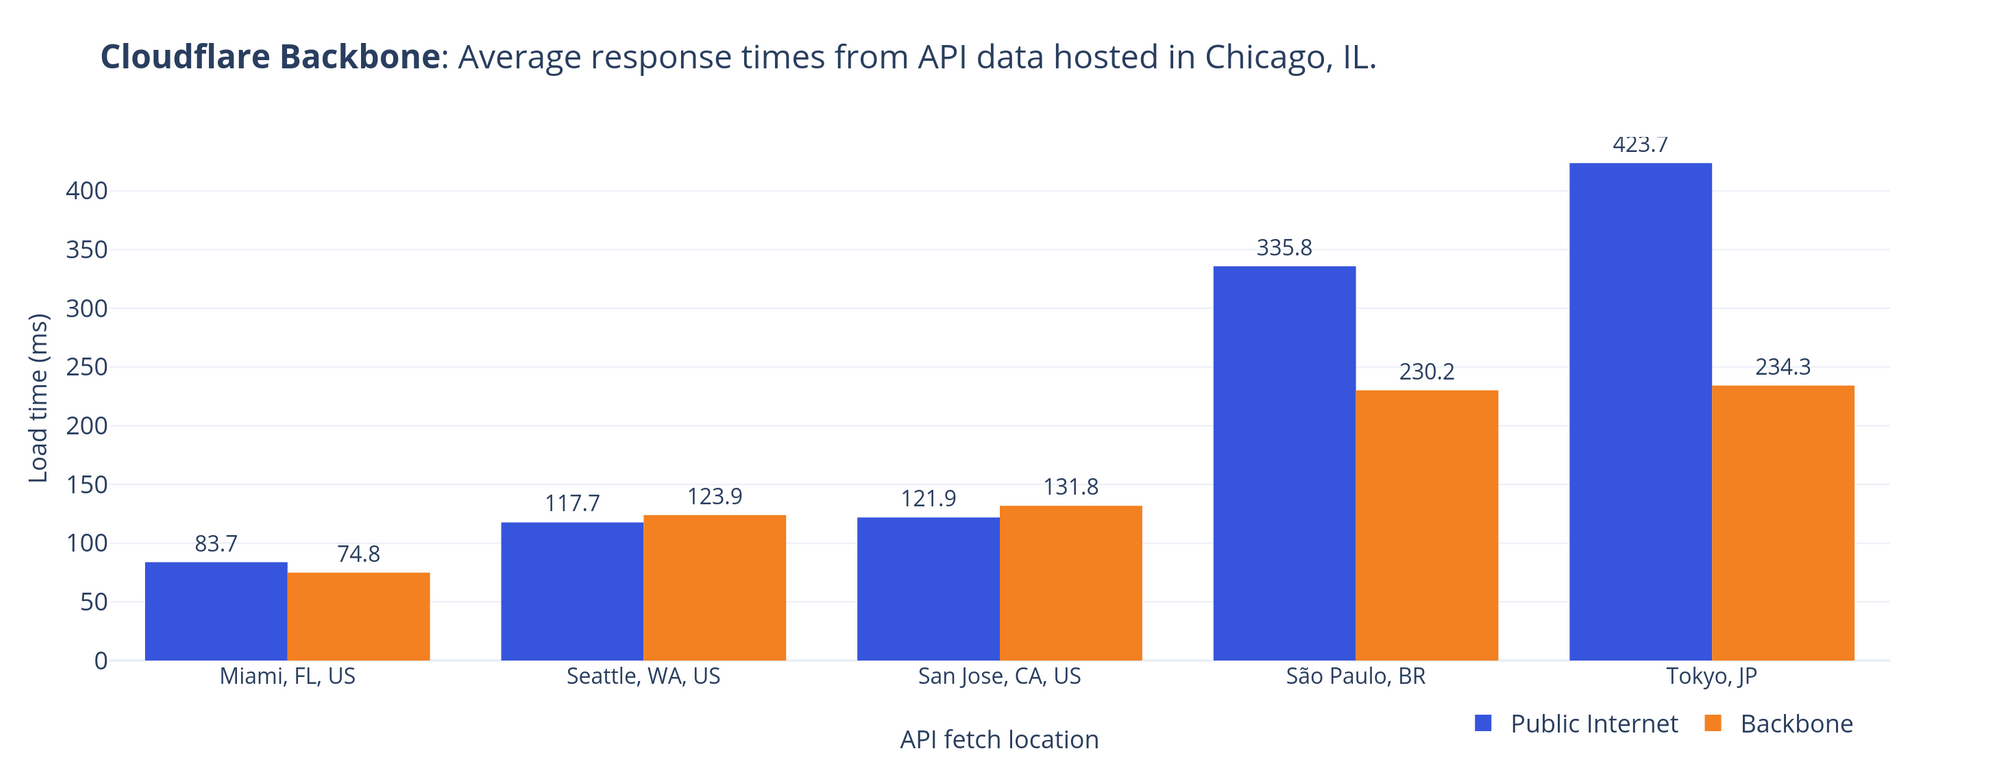 A bar chart showing an overall decrease in average response times when using the Cloudflare backbone, compared to the public Internet.